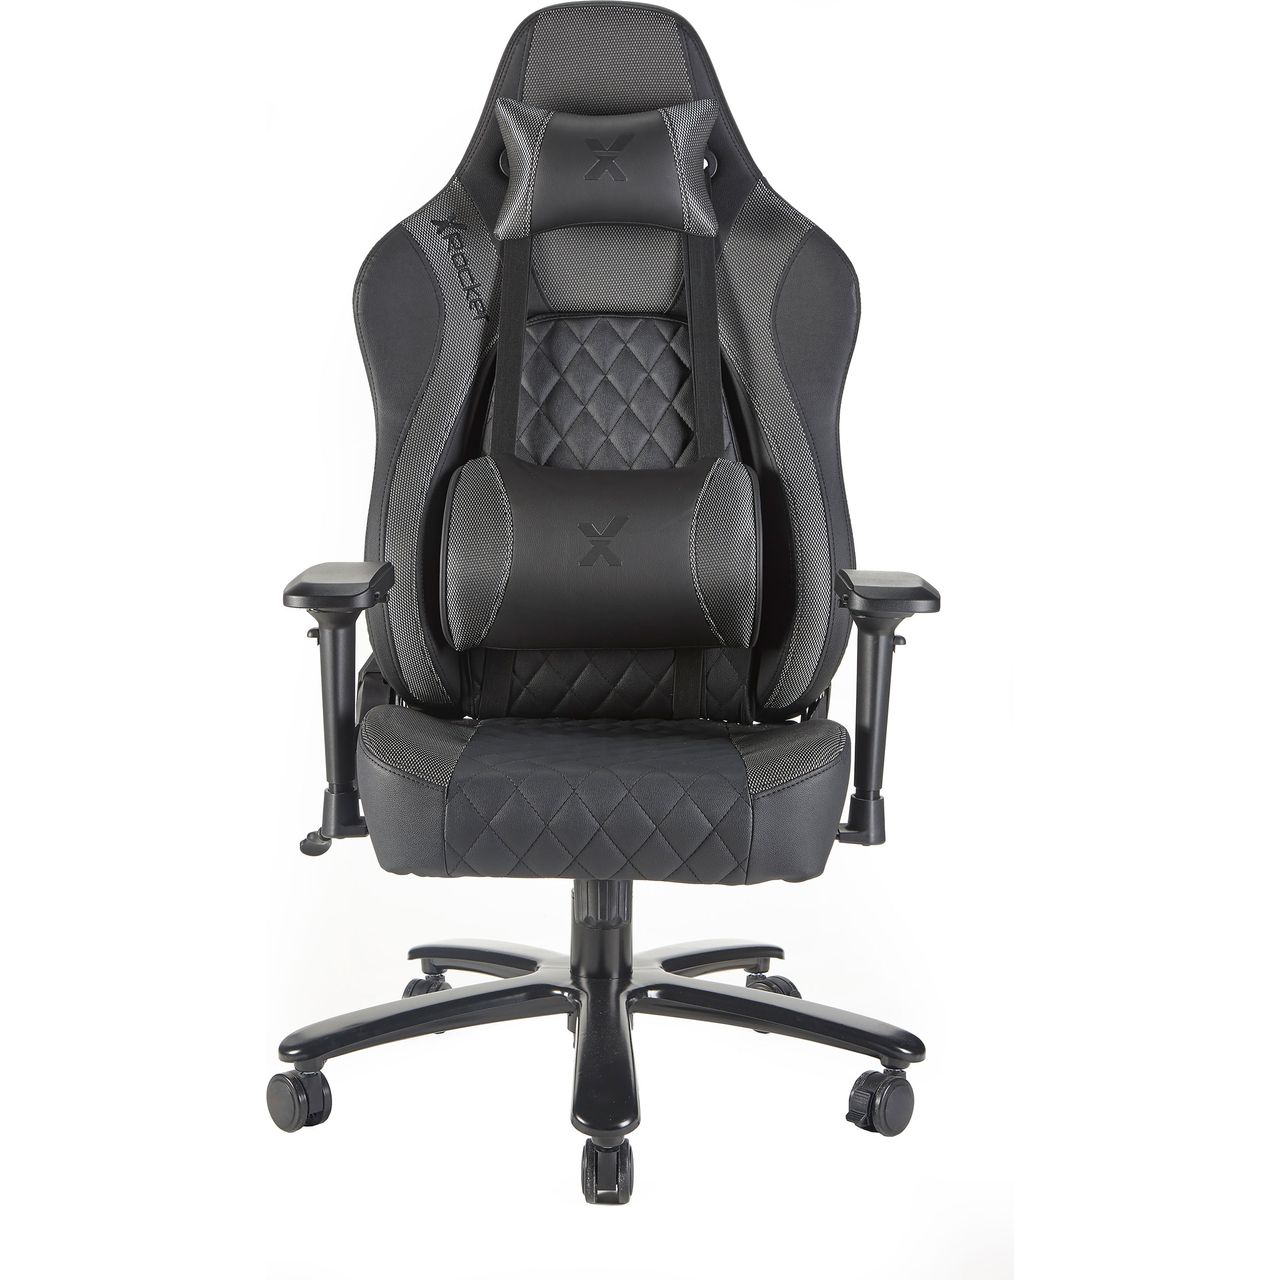 X Rocker XL Delta LE Gaming Chair Review